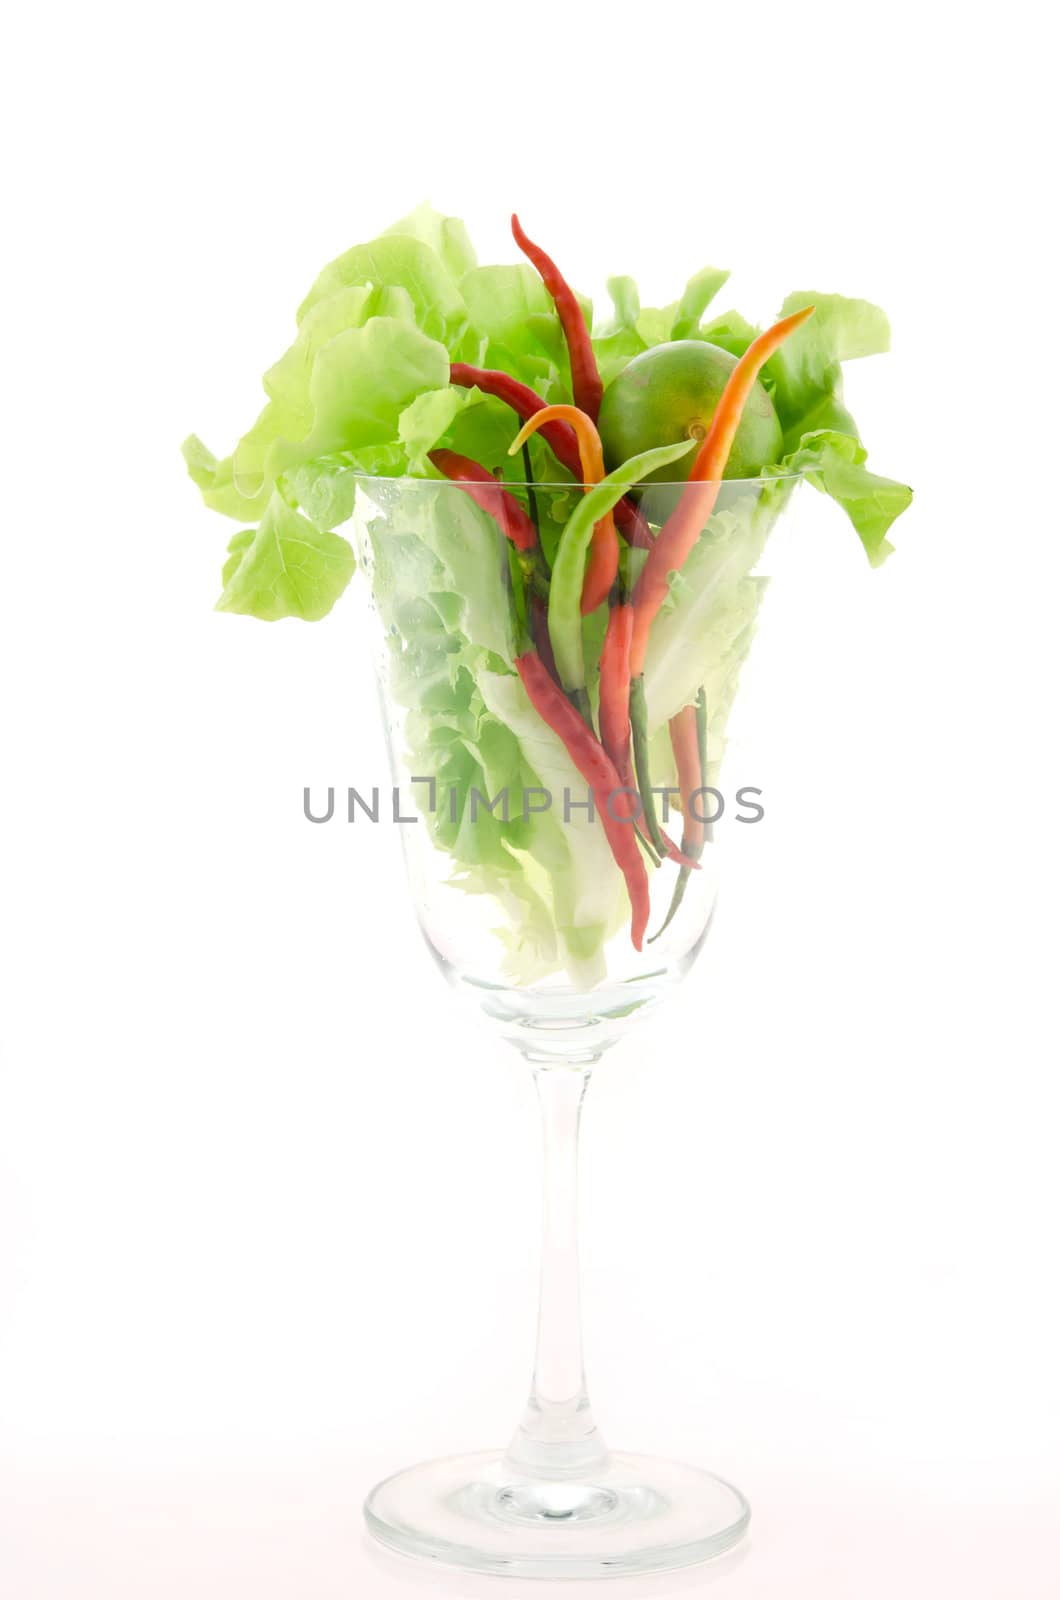 fresh chili , lime and lettuce  in glass on white background